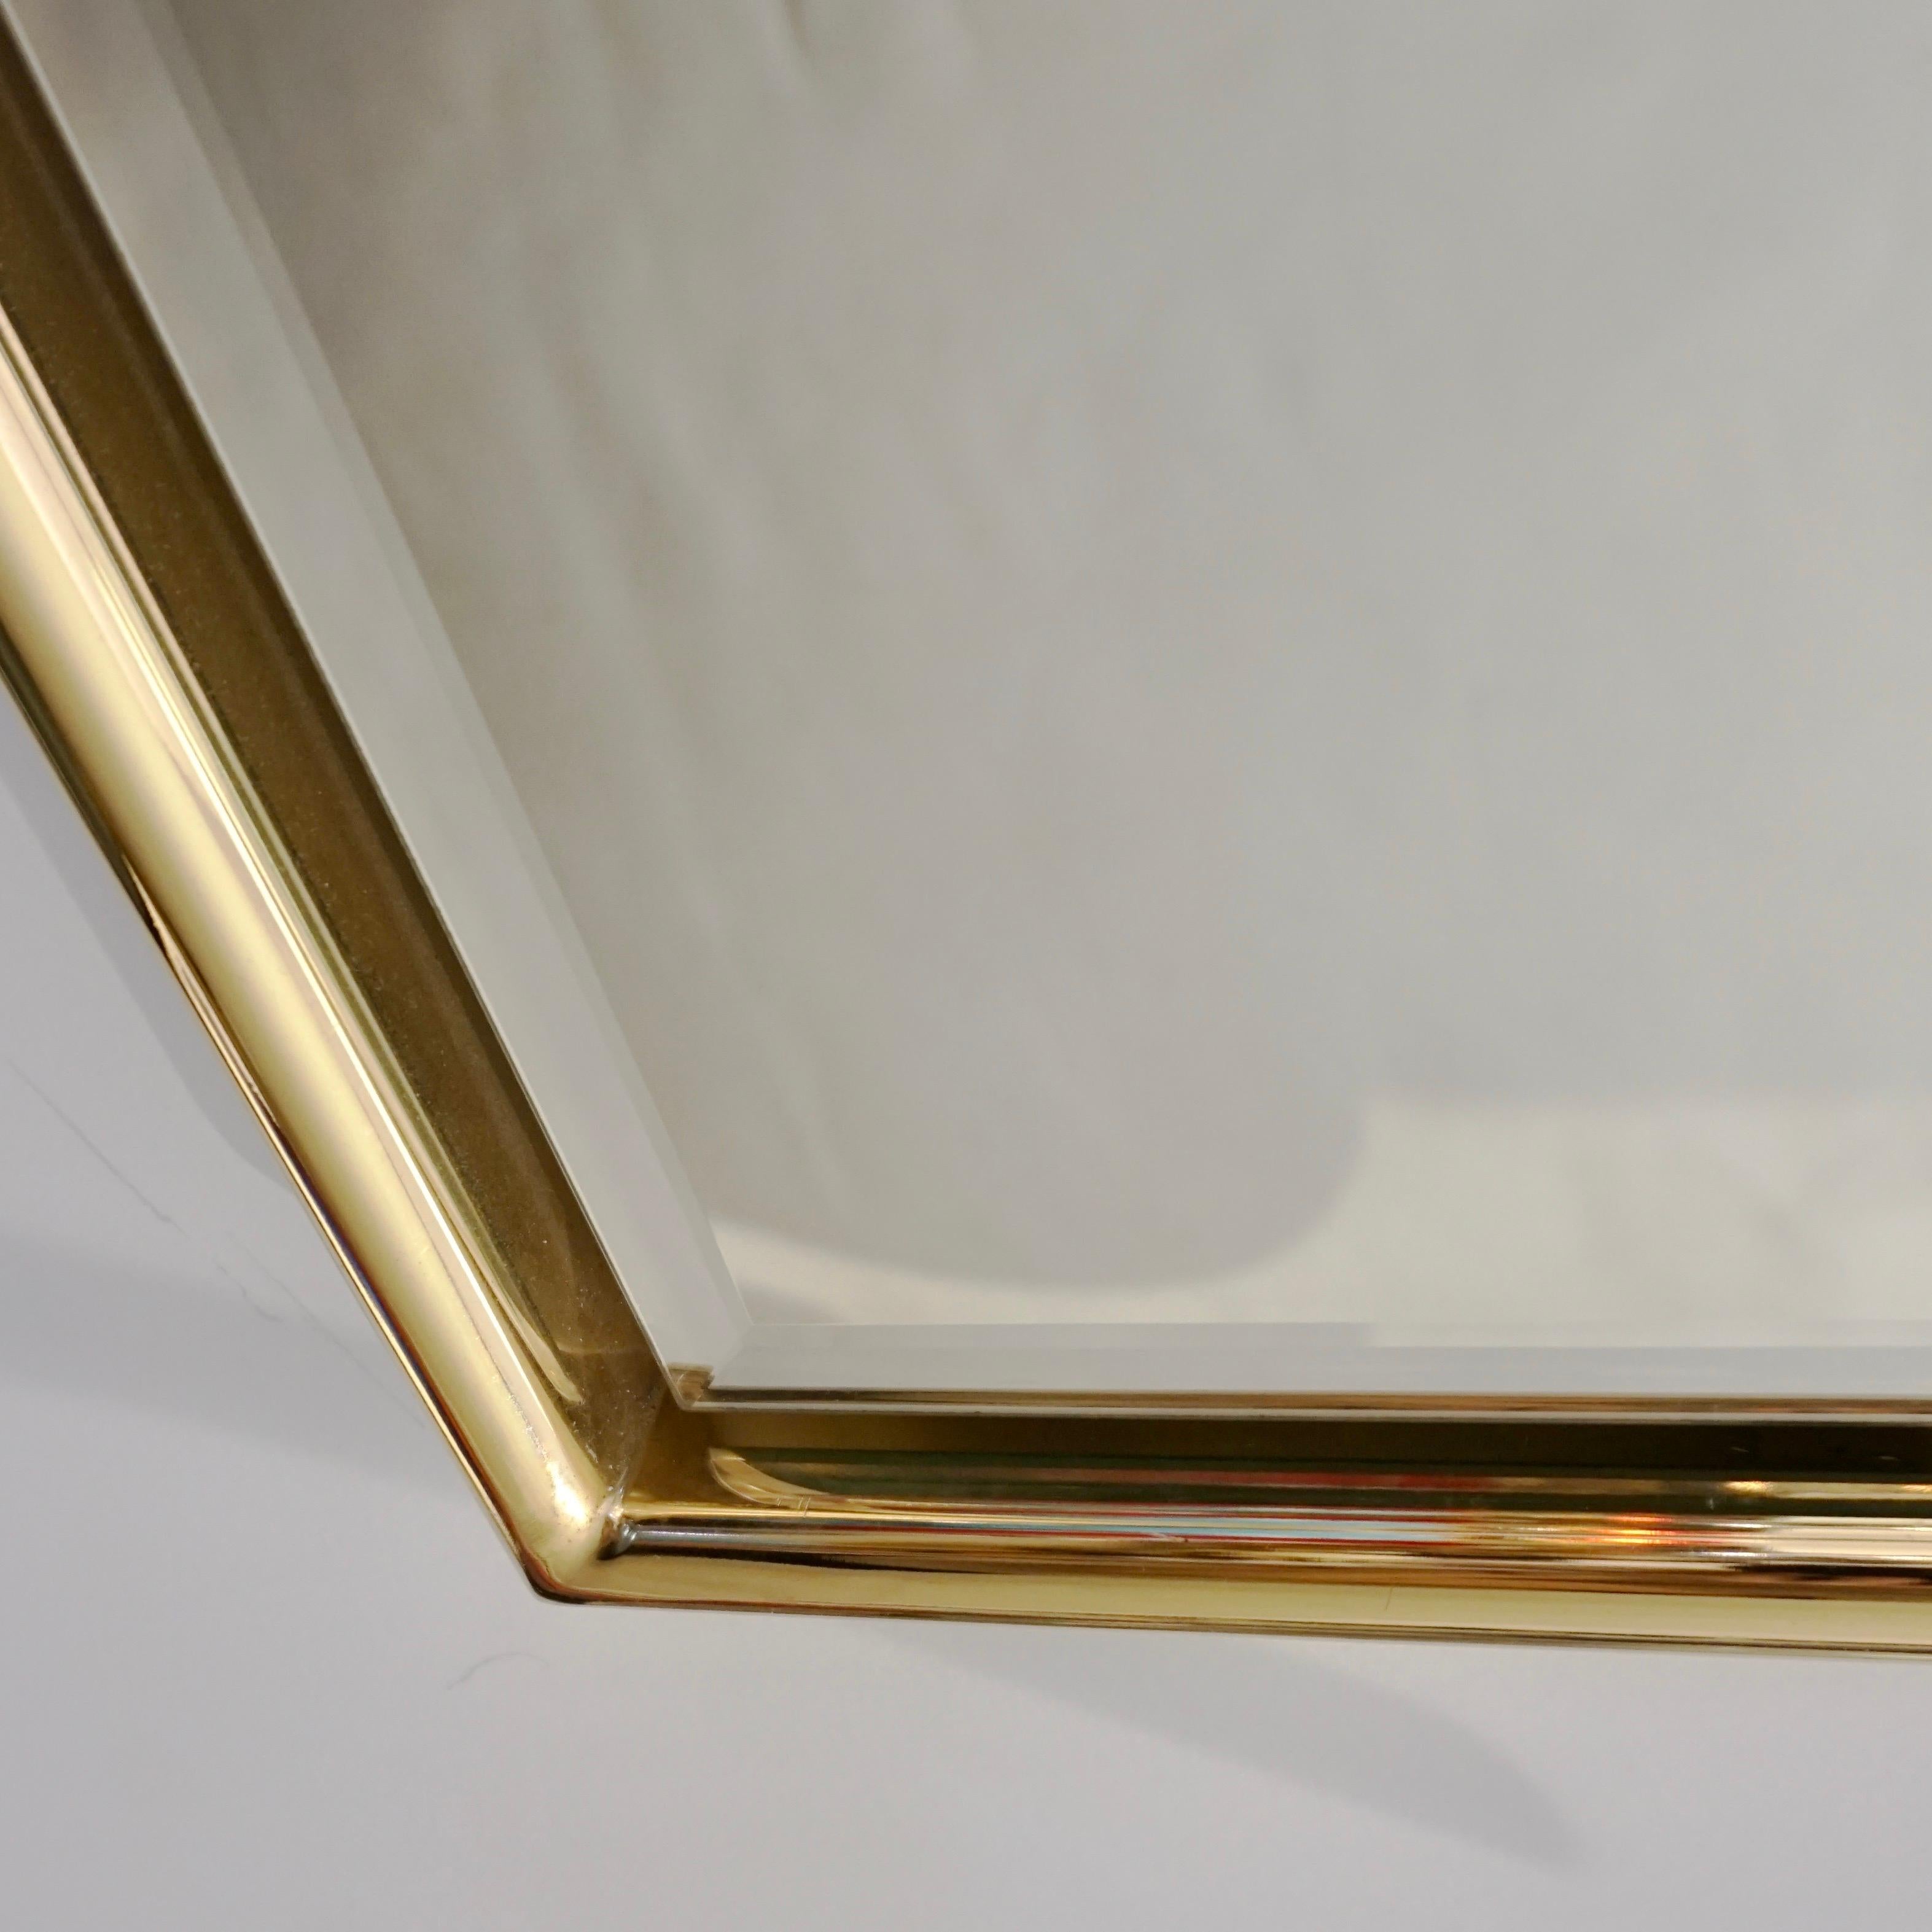 1960s Italian Minimalist Brass Full Floating Mirror with Round Arched Top Frame For Sale 7